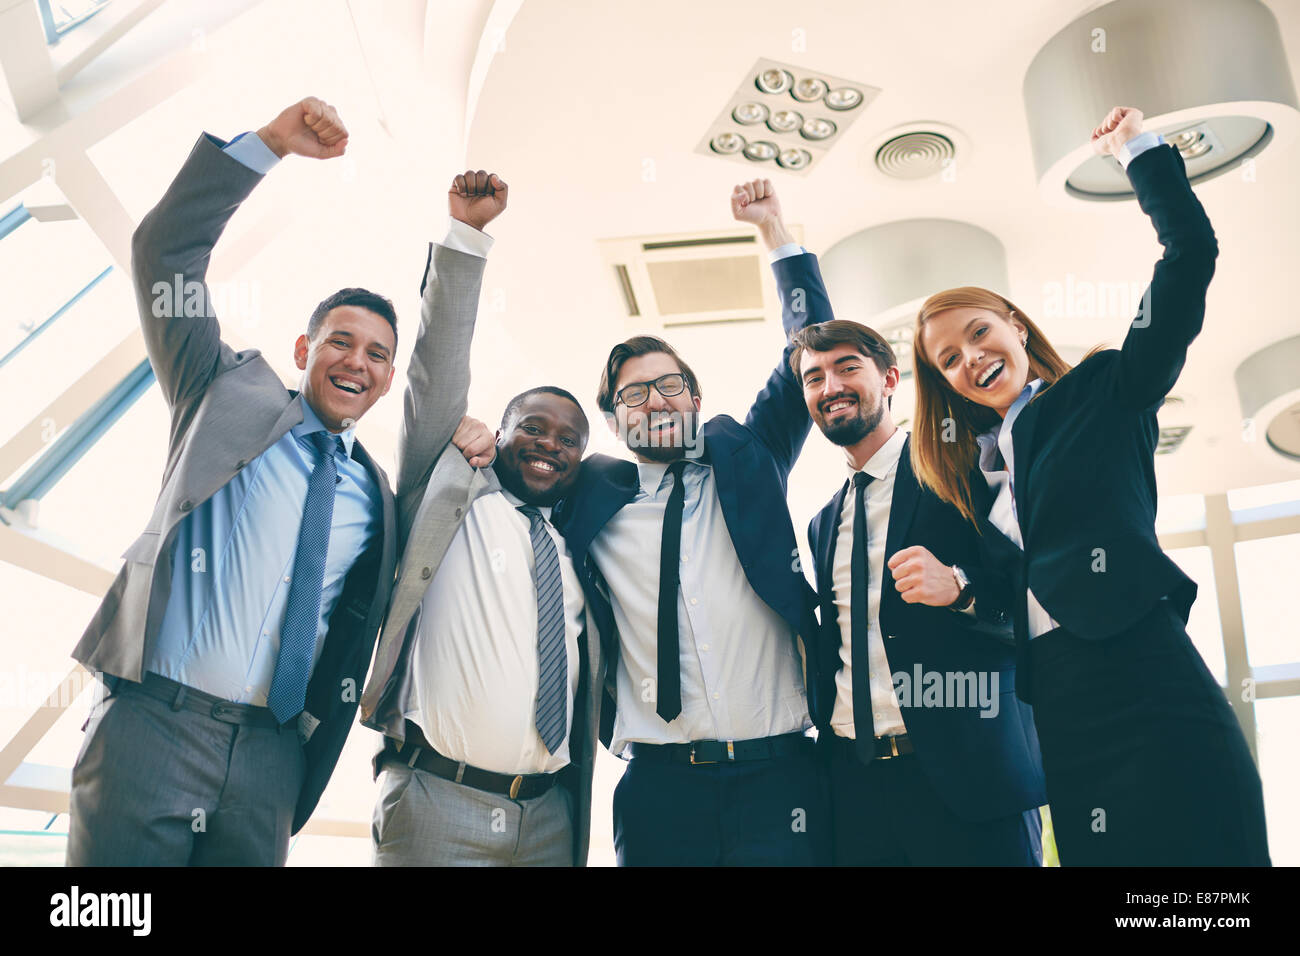 Group of ecstatic business leaders with raised arms expressing their gladness Stock Photo